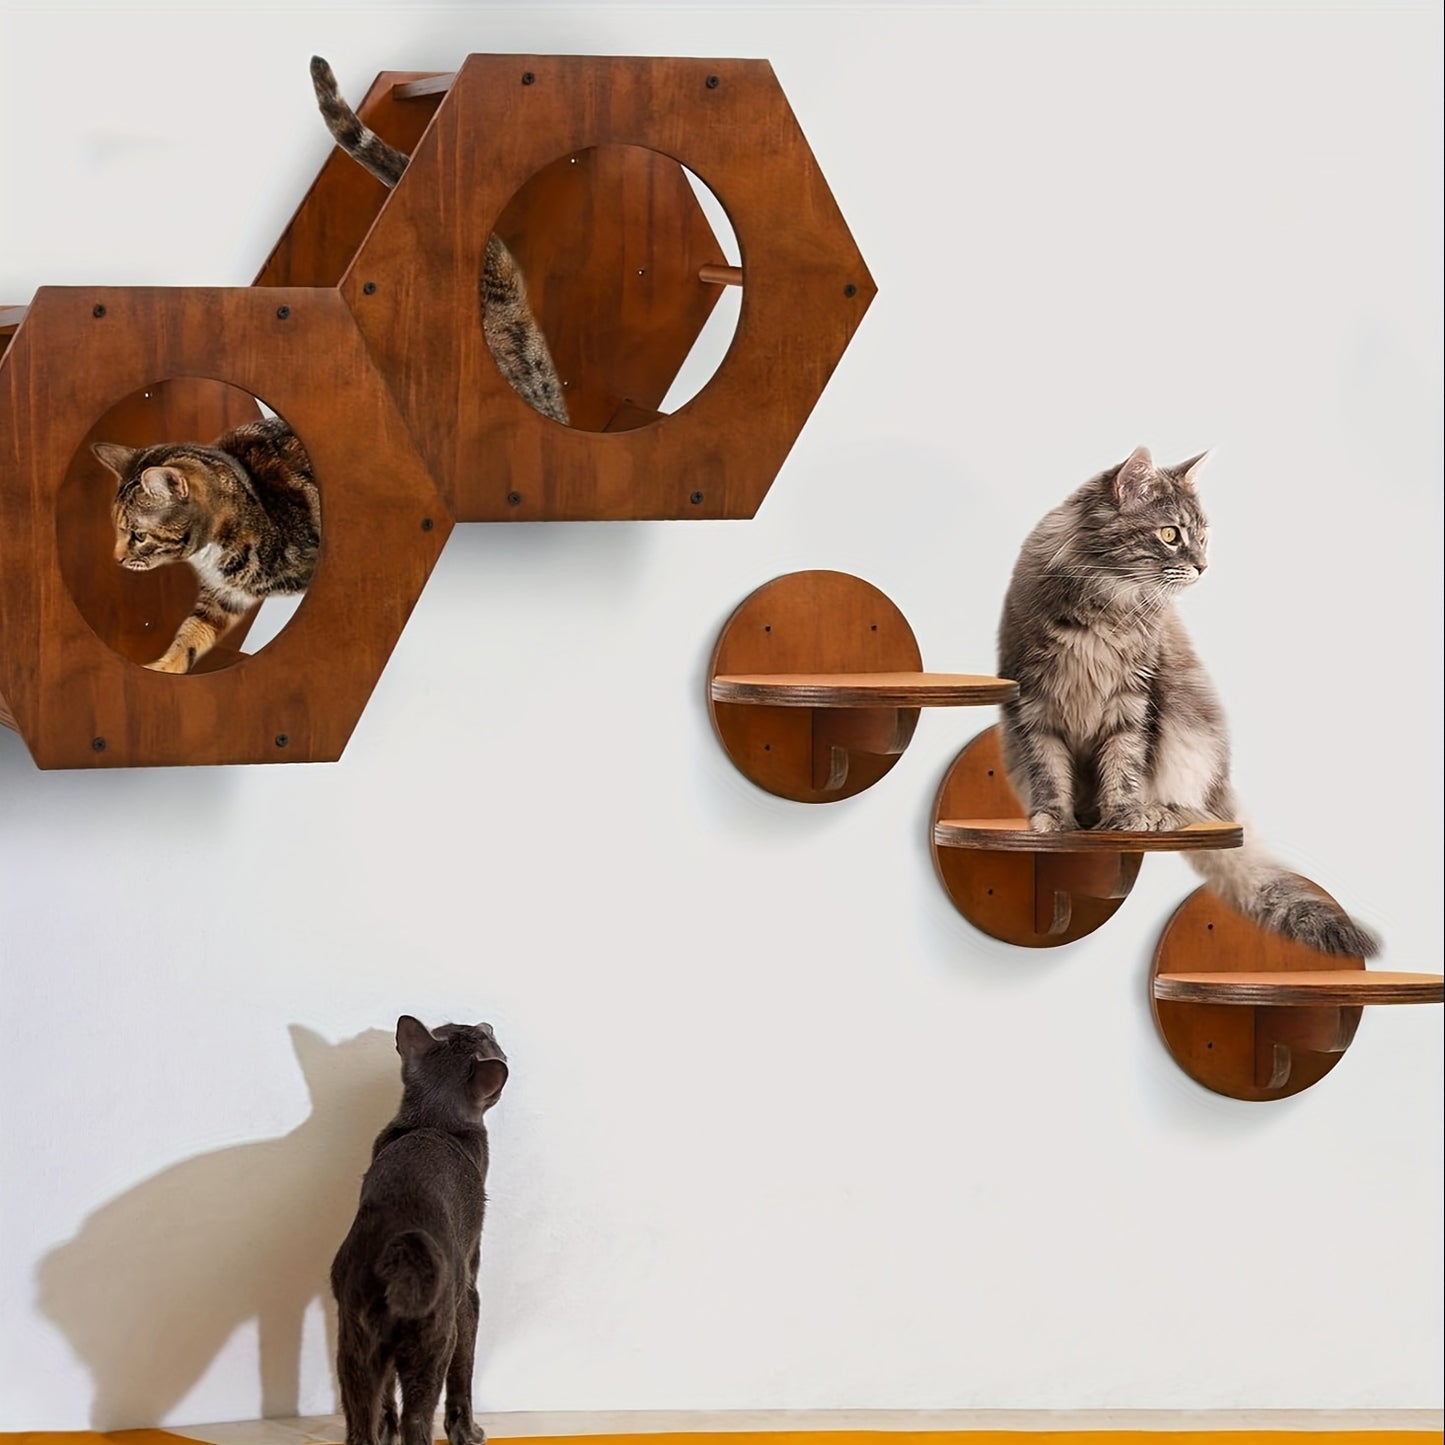 4-Piece Cat Wall Furniture Set - Cat Wall Shelves, Steps, and Perch - Supports Cats up to 15 lbs - Includes Scratching Pad